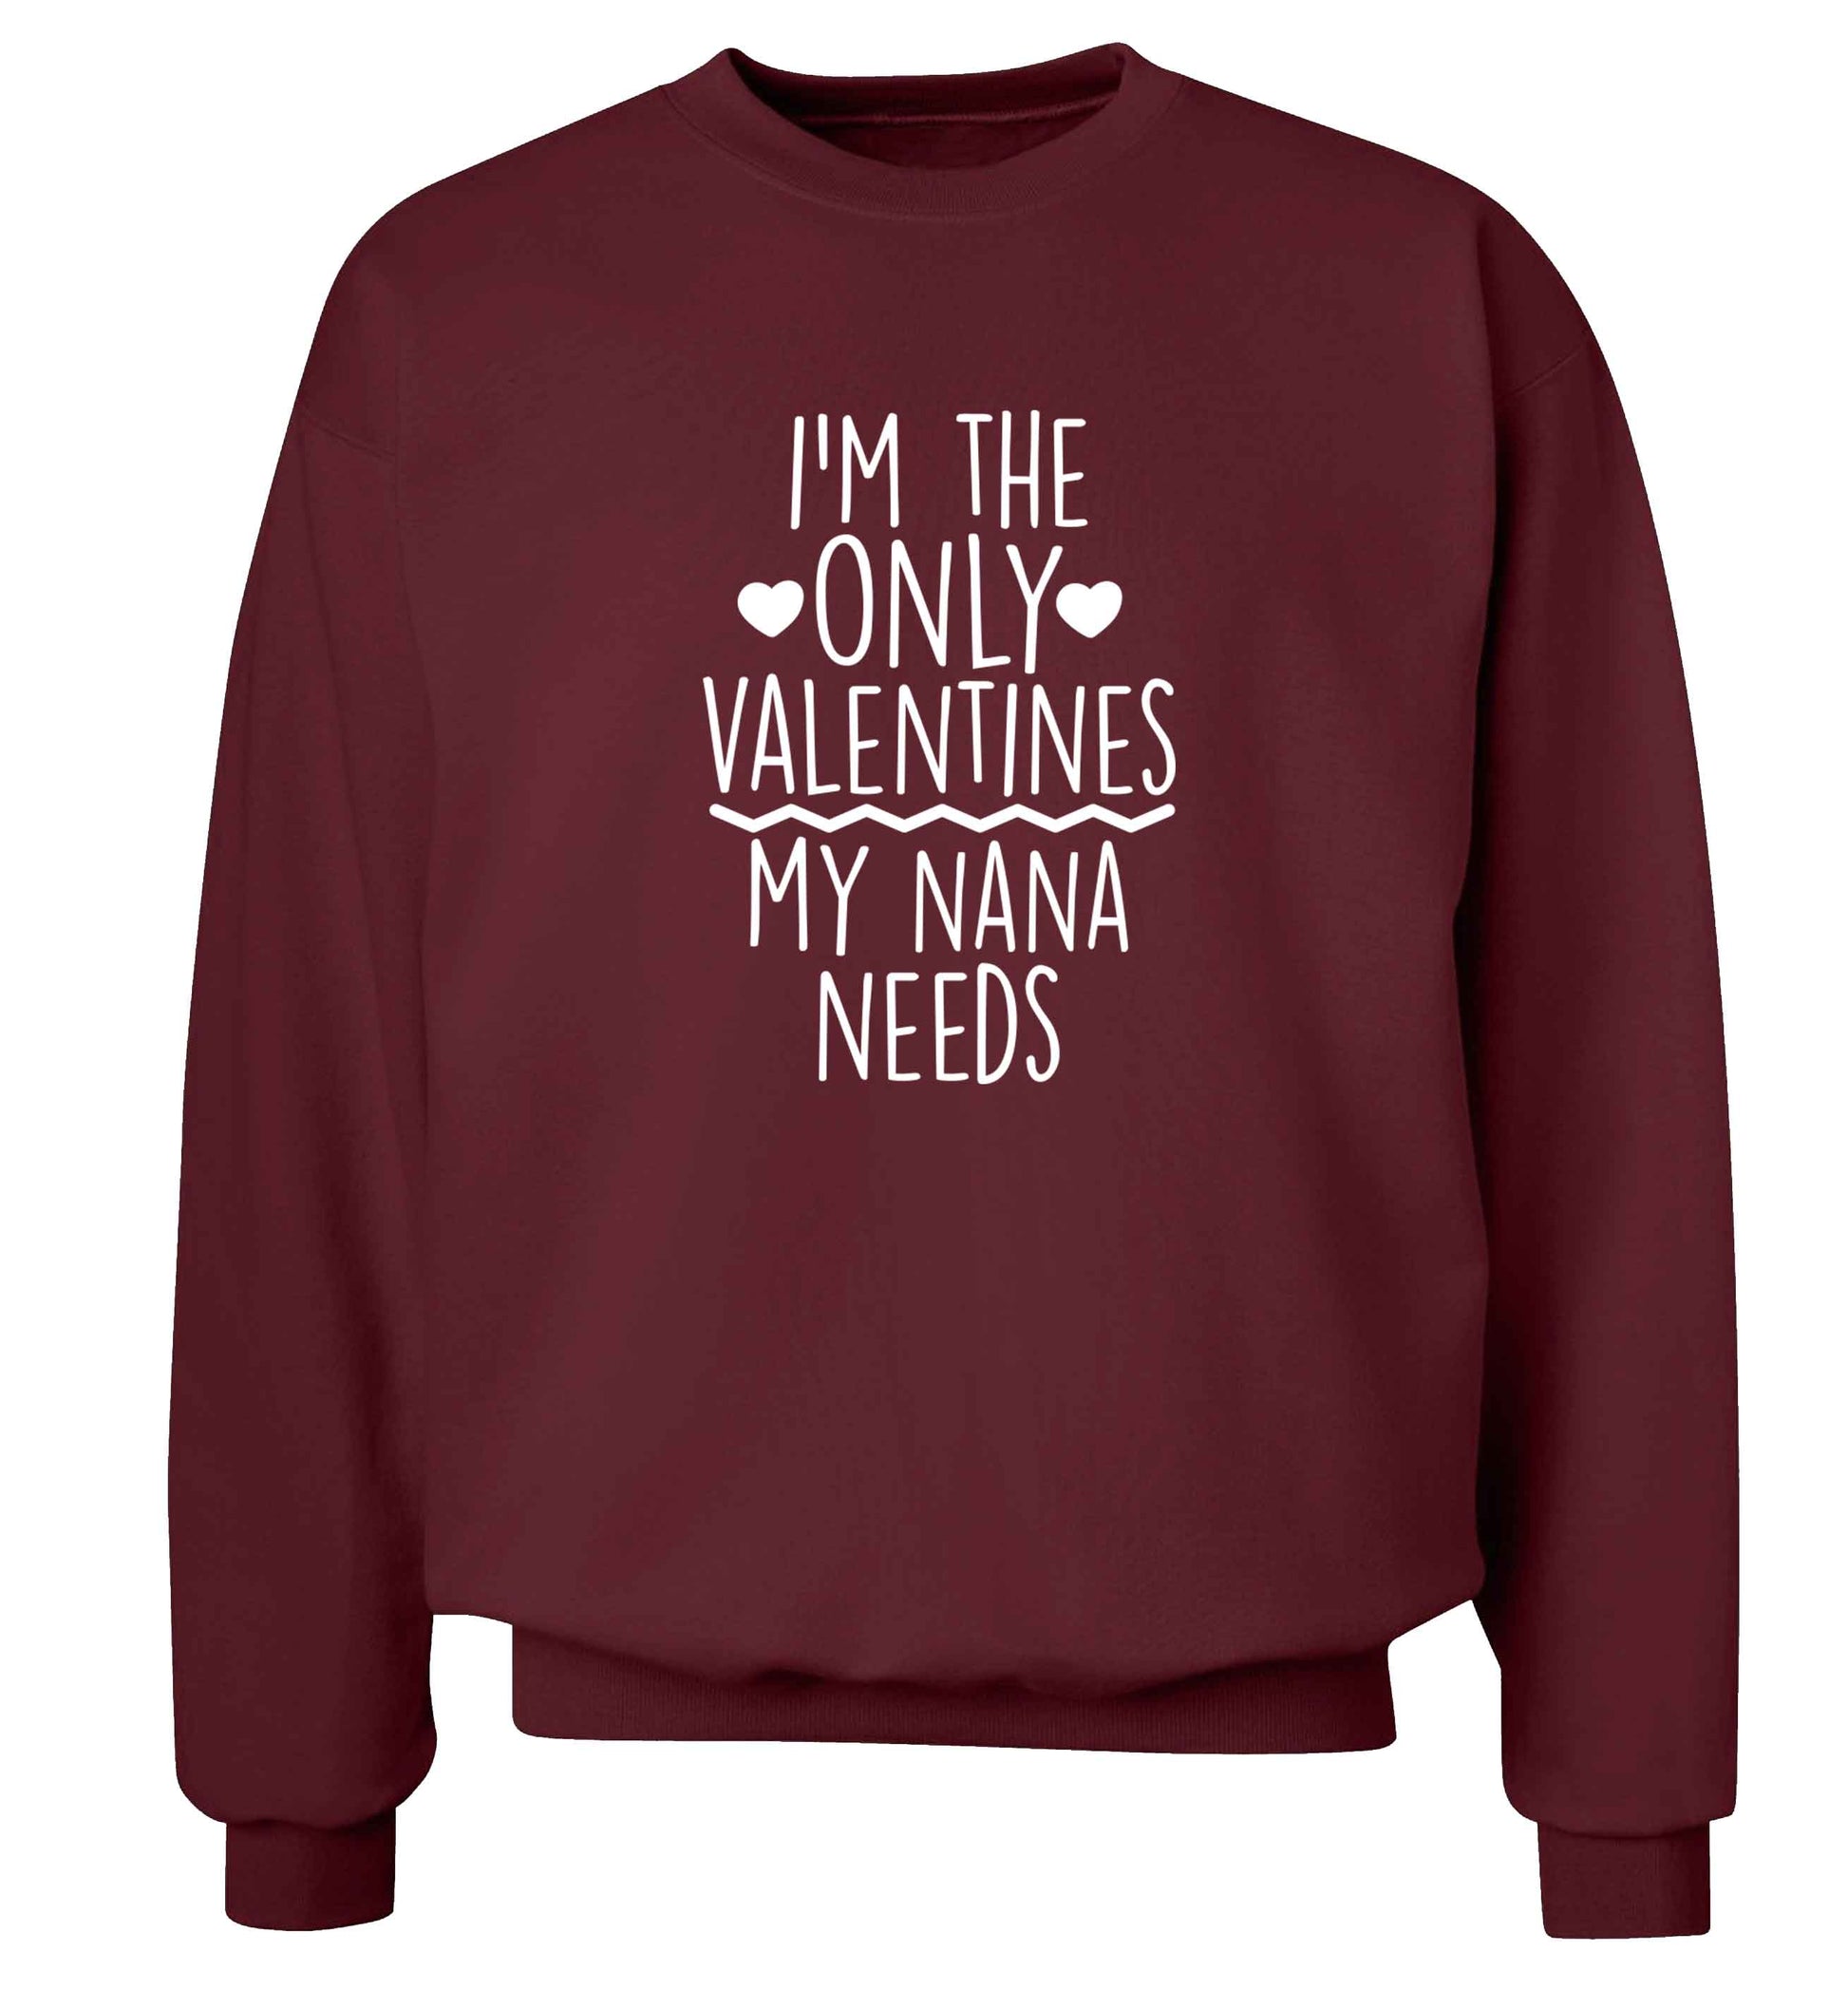 I'm the only valentines my nana needs adult's unisex maroon sweater 2XL